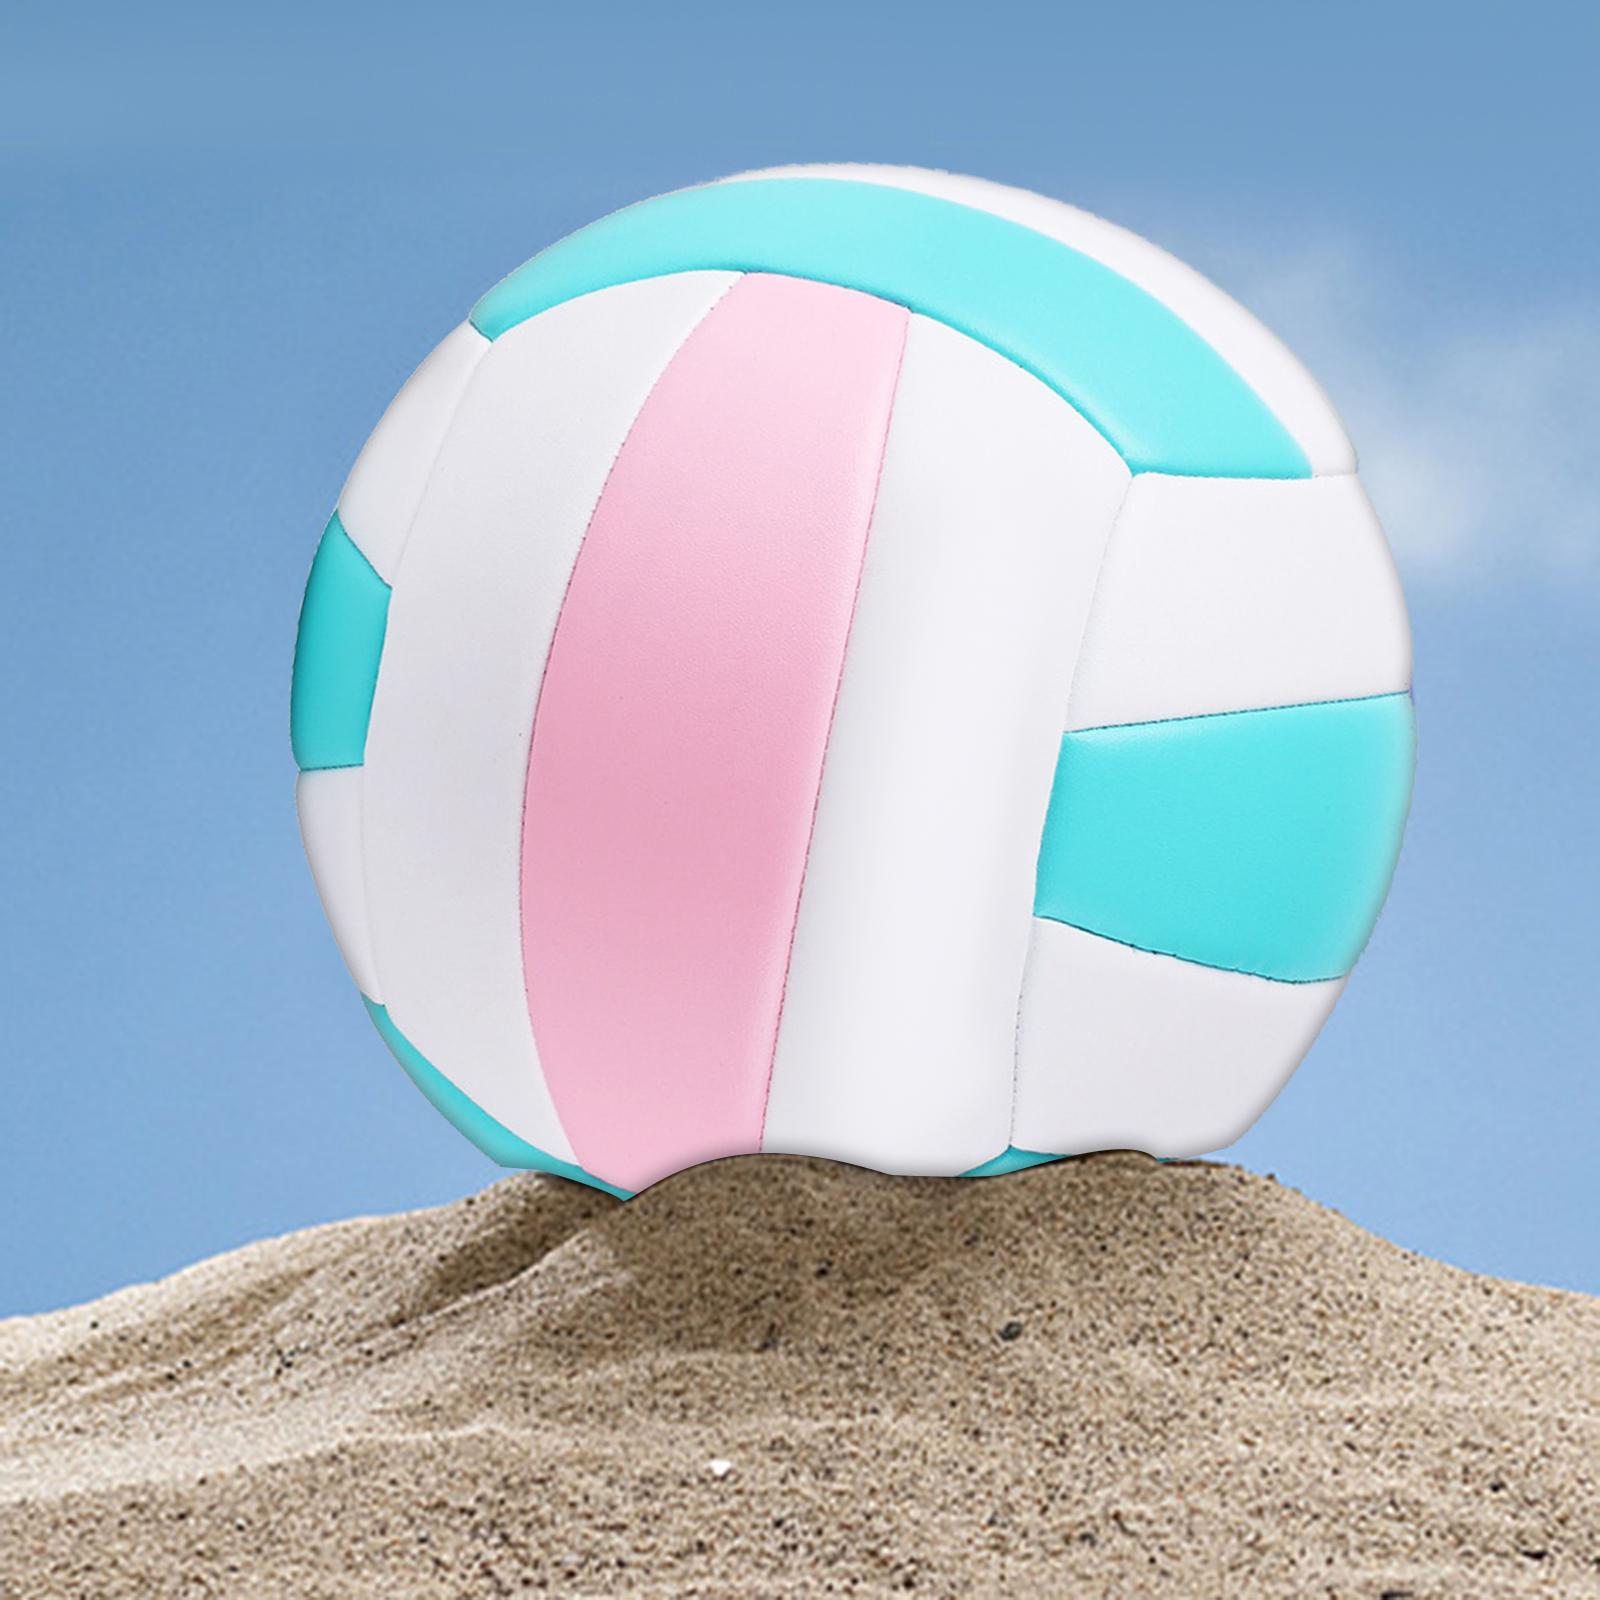 Standard Indoor Volleyball Outdoor Ball for Kids Teenager Pink Green White